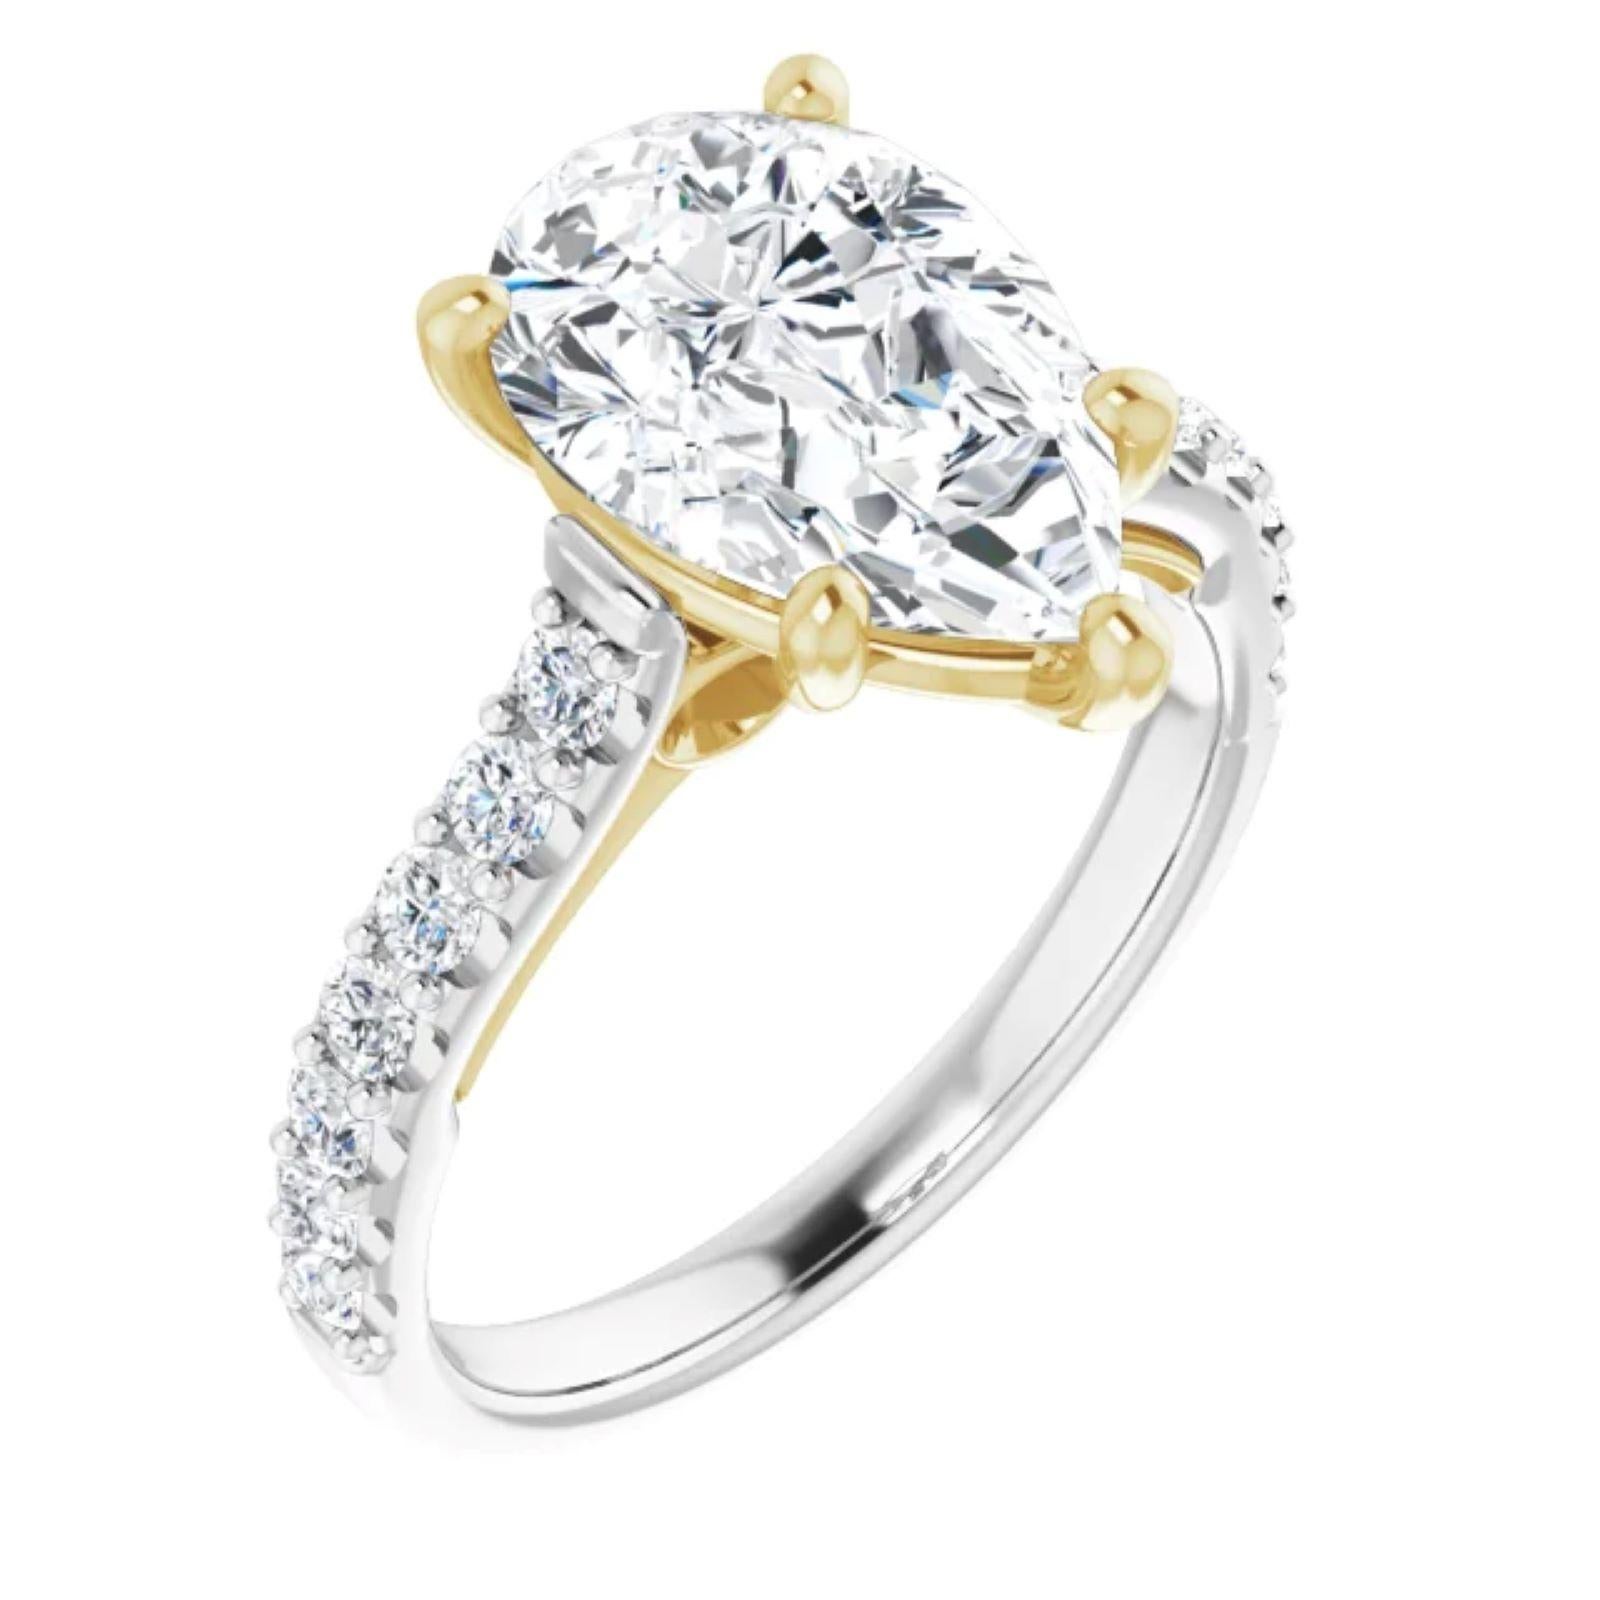 Modern 3 carat pear shaped engagement ring. For Sale